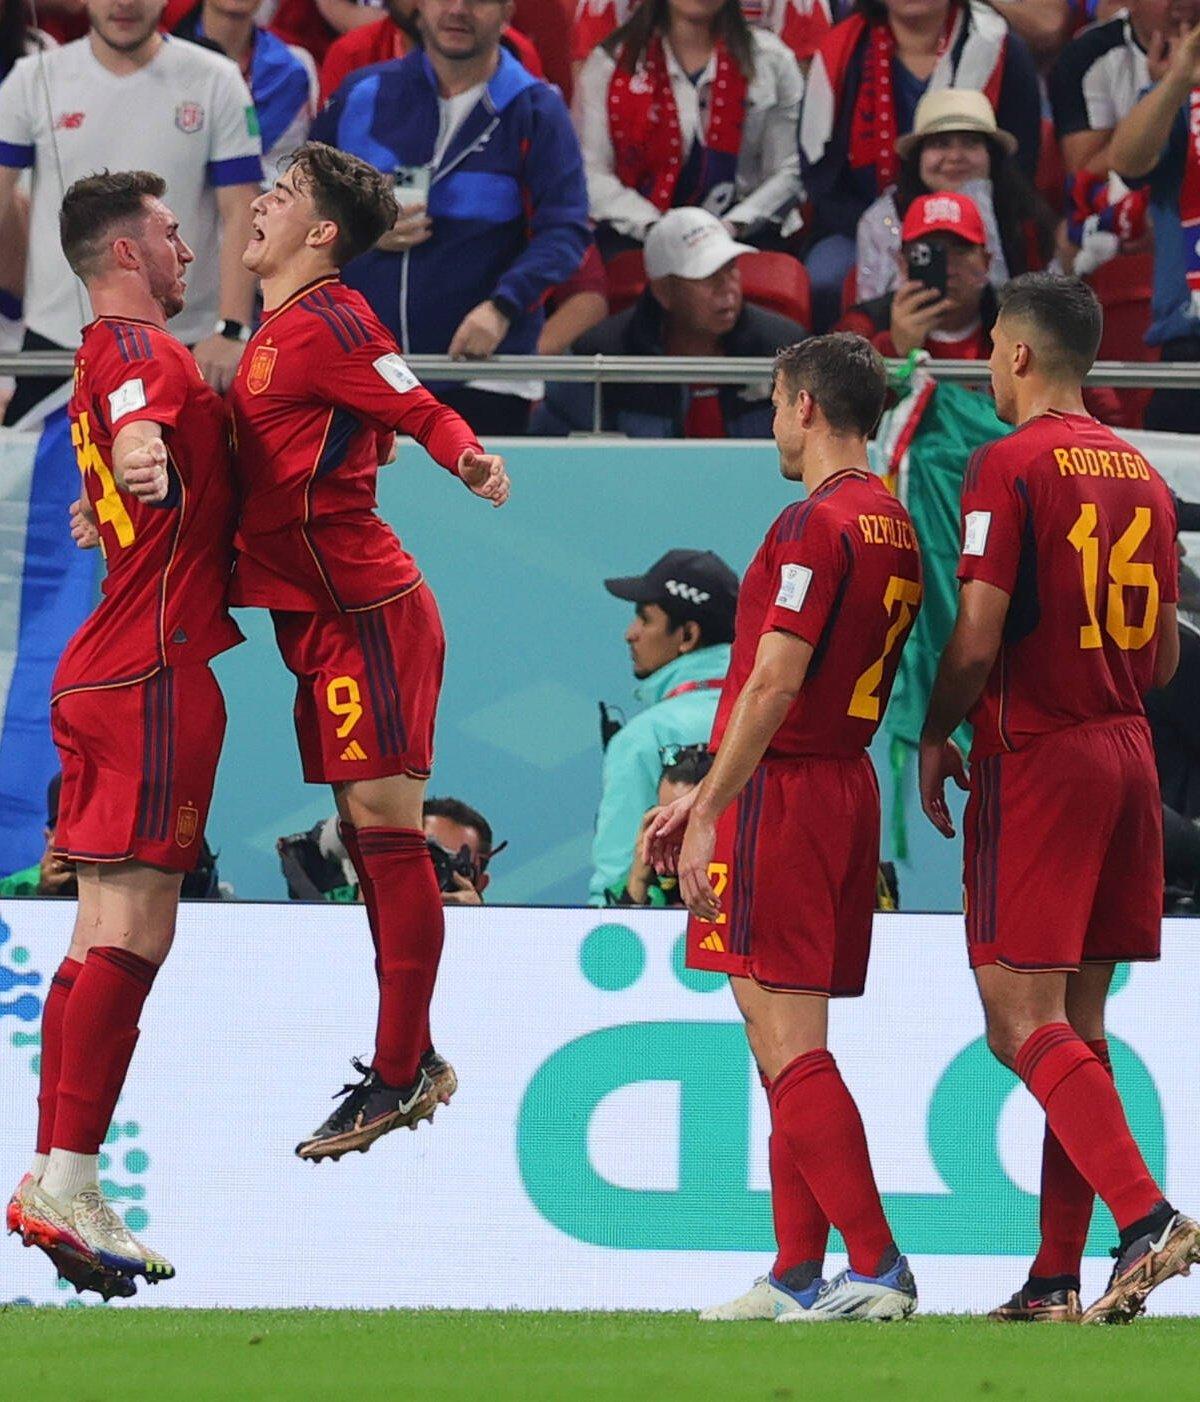 Seven heavens for Spain as they demolish Costa Rica in Group E 2022 Qatar World Cup opener